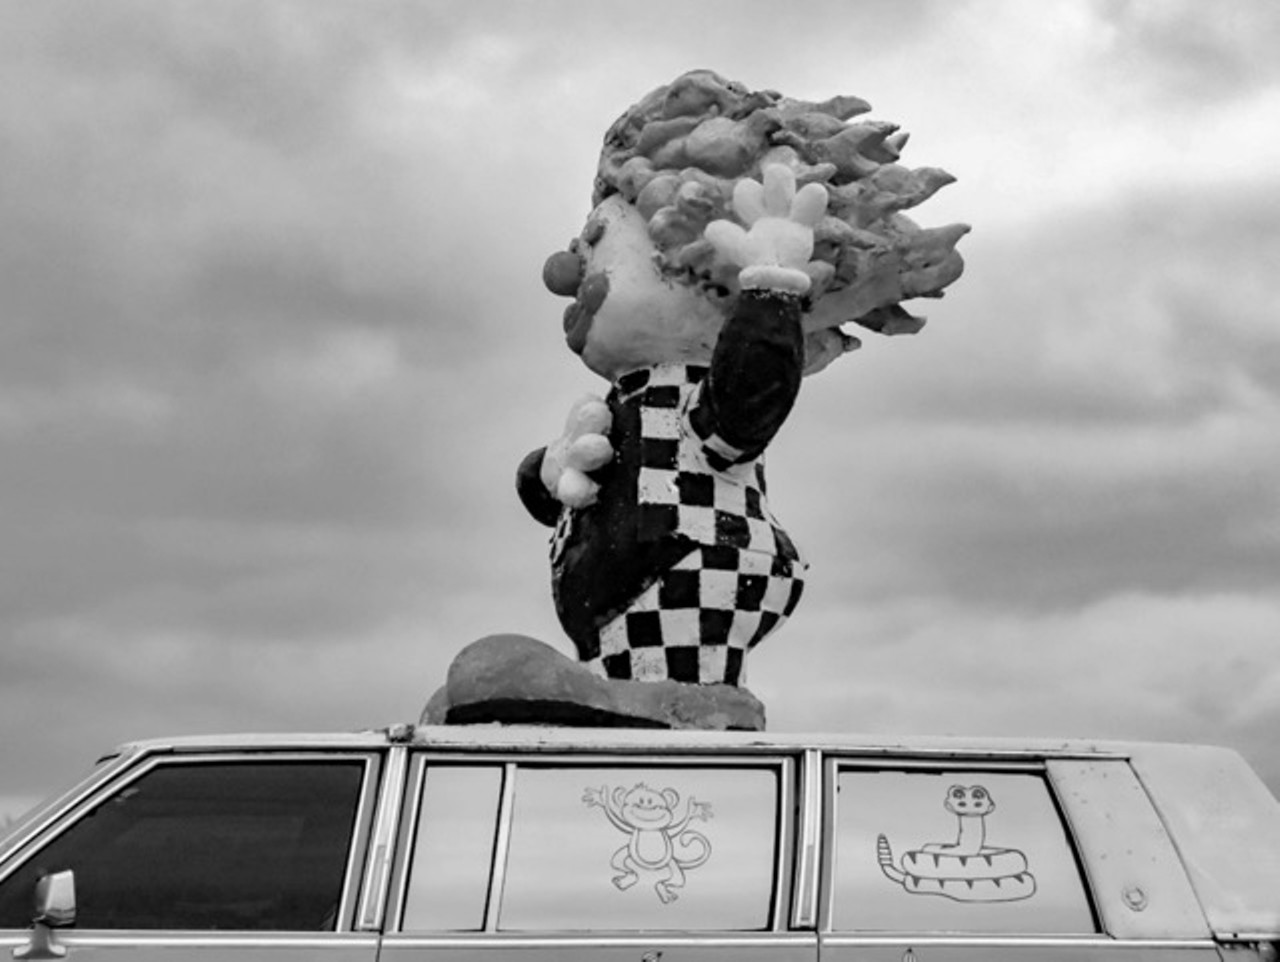 Black and White Photography Third Place
Clowns On The Waterson By Katie Hughbanks